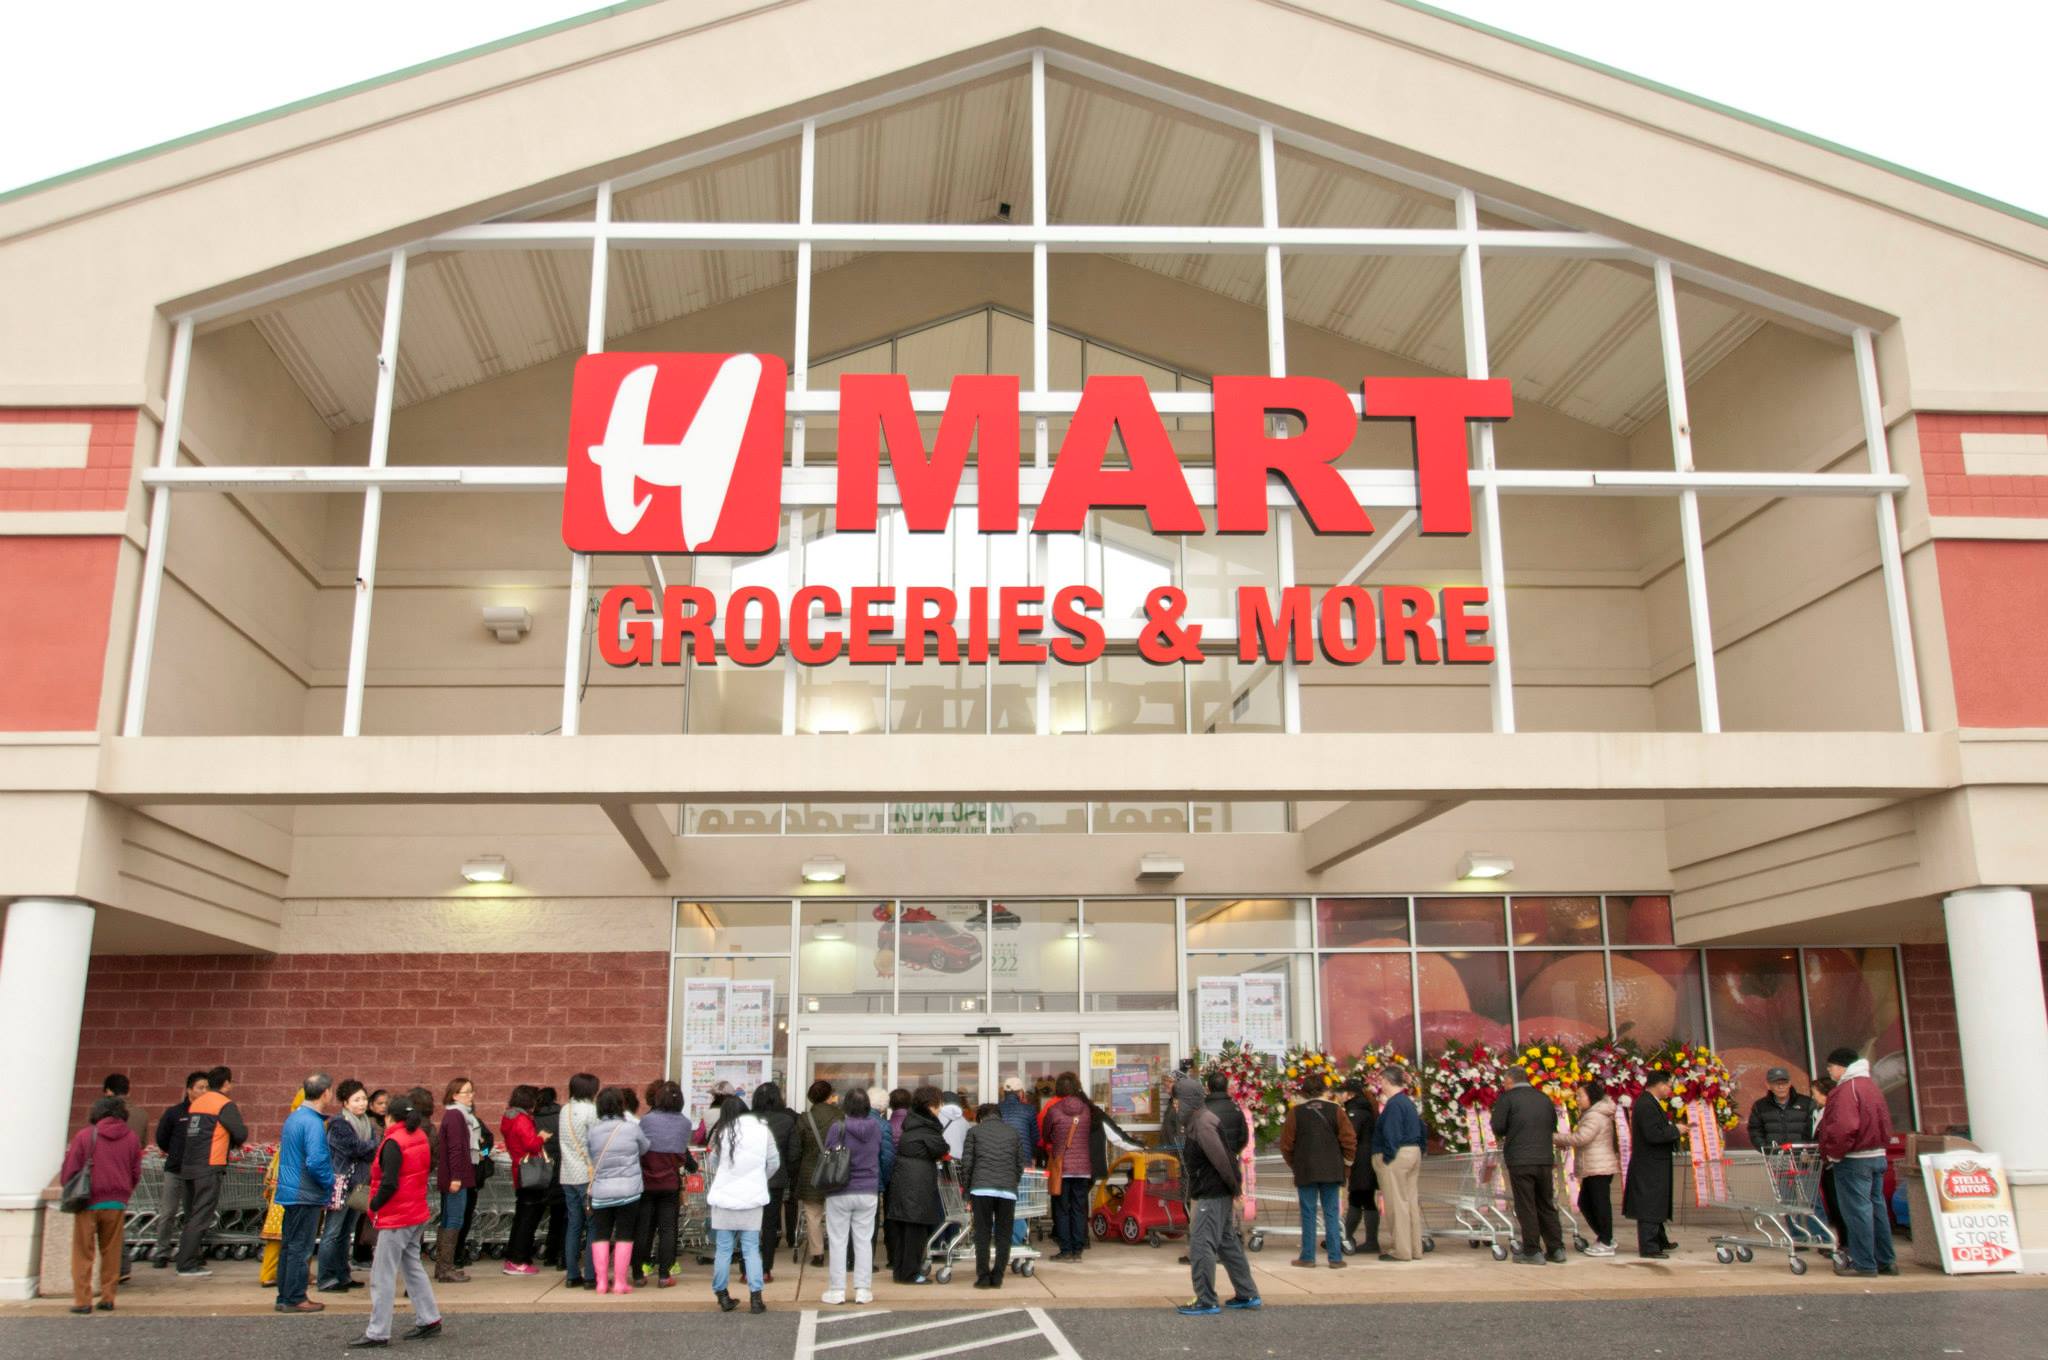 H Mart’s facade in Maryland